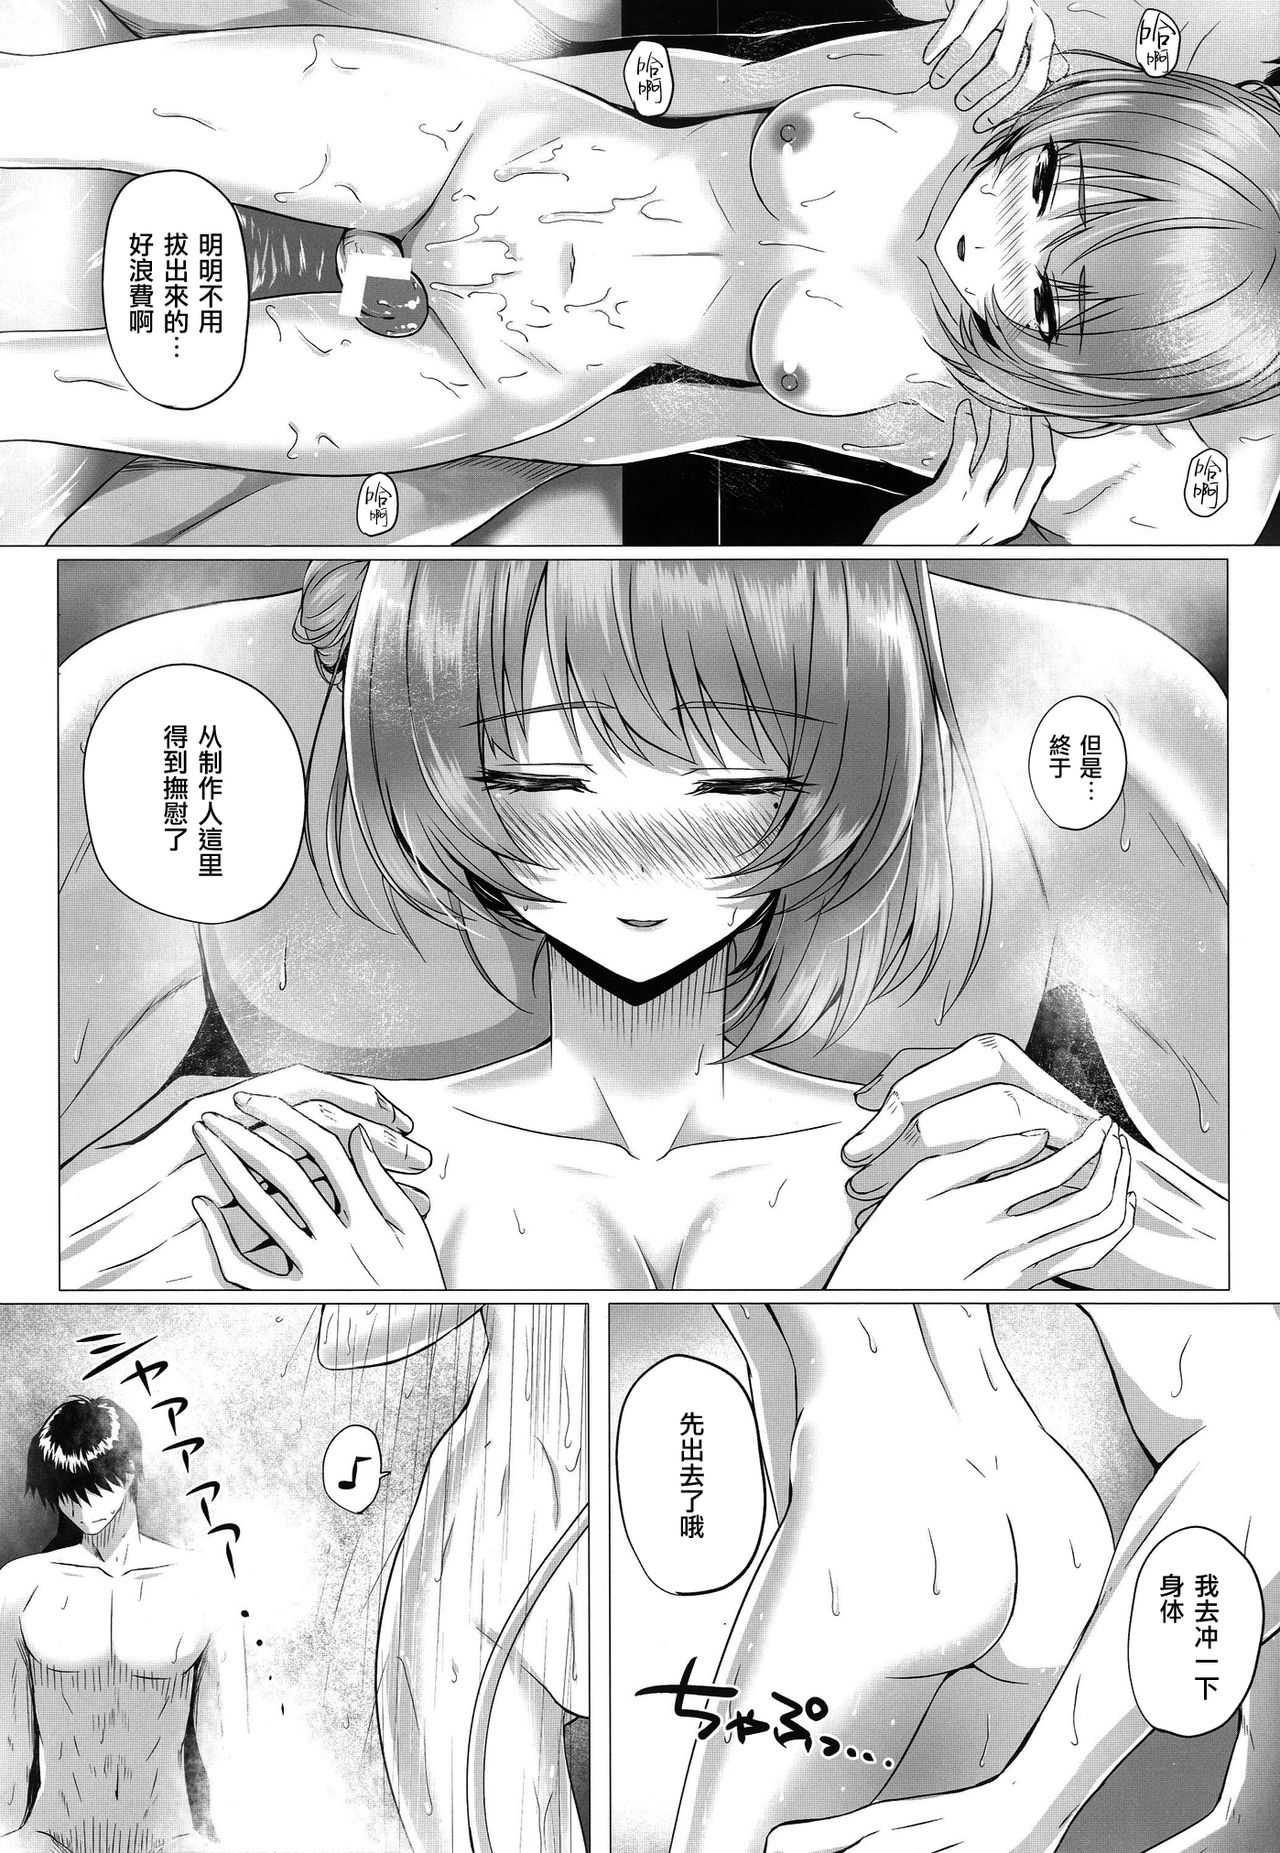 (C90) [N.S Craft (Simon)] Kaede to P (THE IDOLM@STER CINDERELLA GIRLS) [Chinese] [无毒汉化组] page 17 full